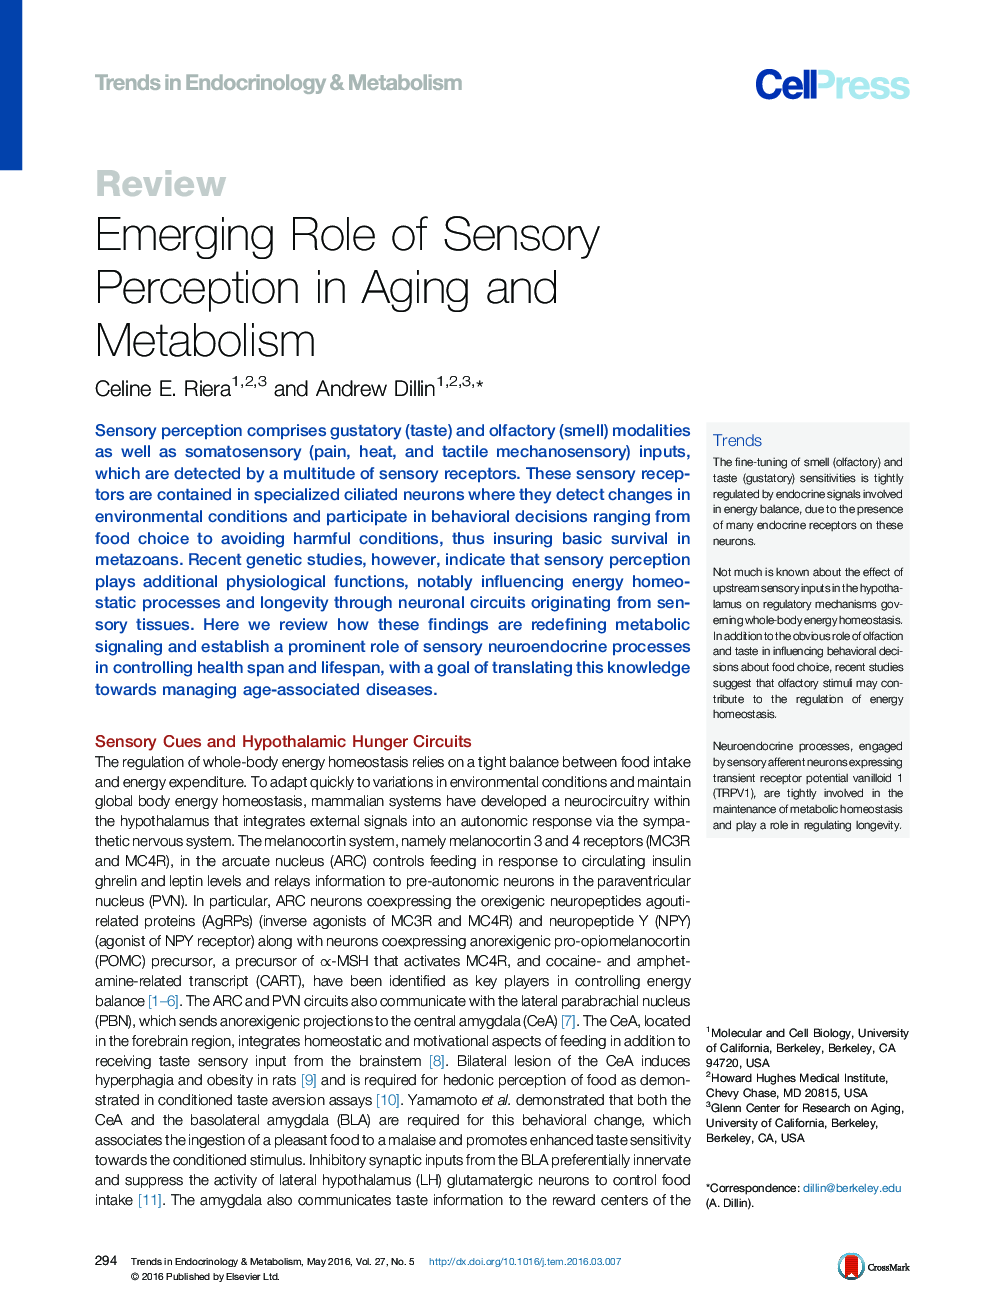 Emerging Role of Sensory Perception in Aging and Metabolism